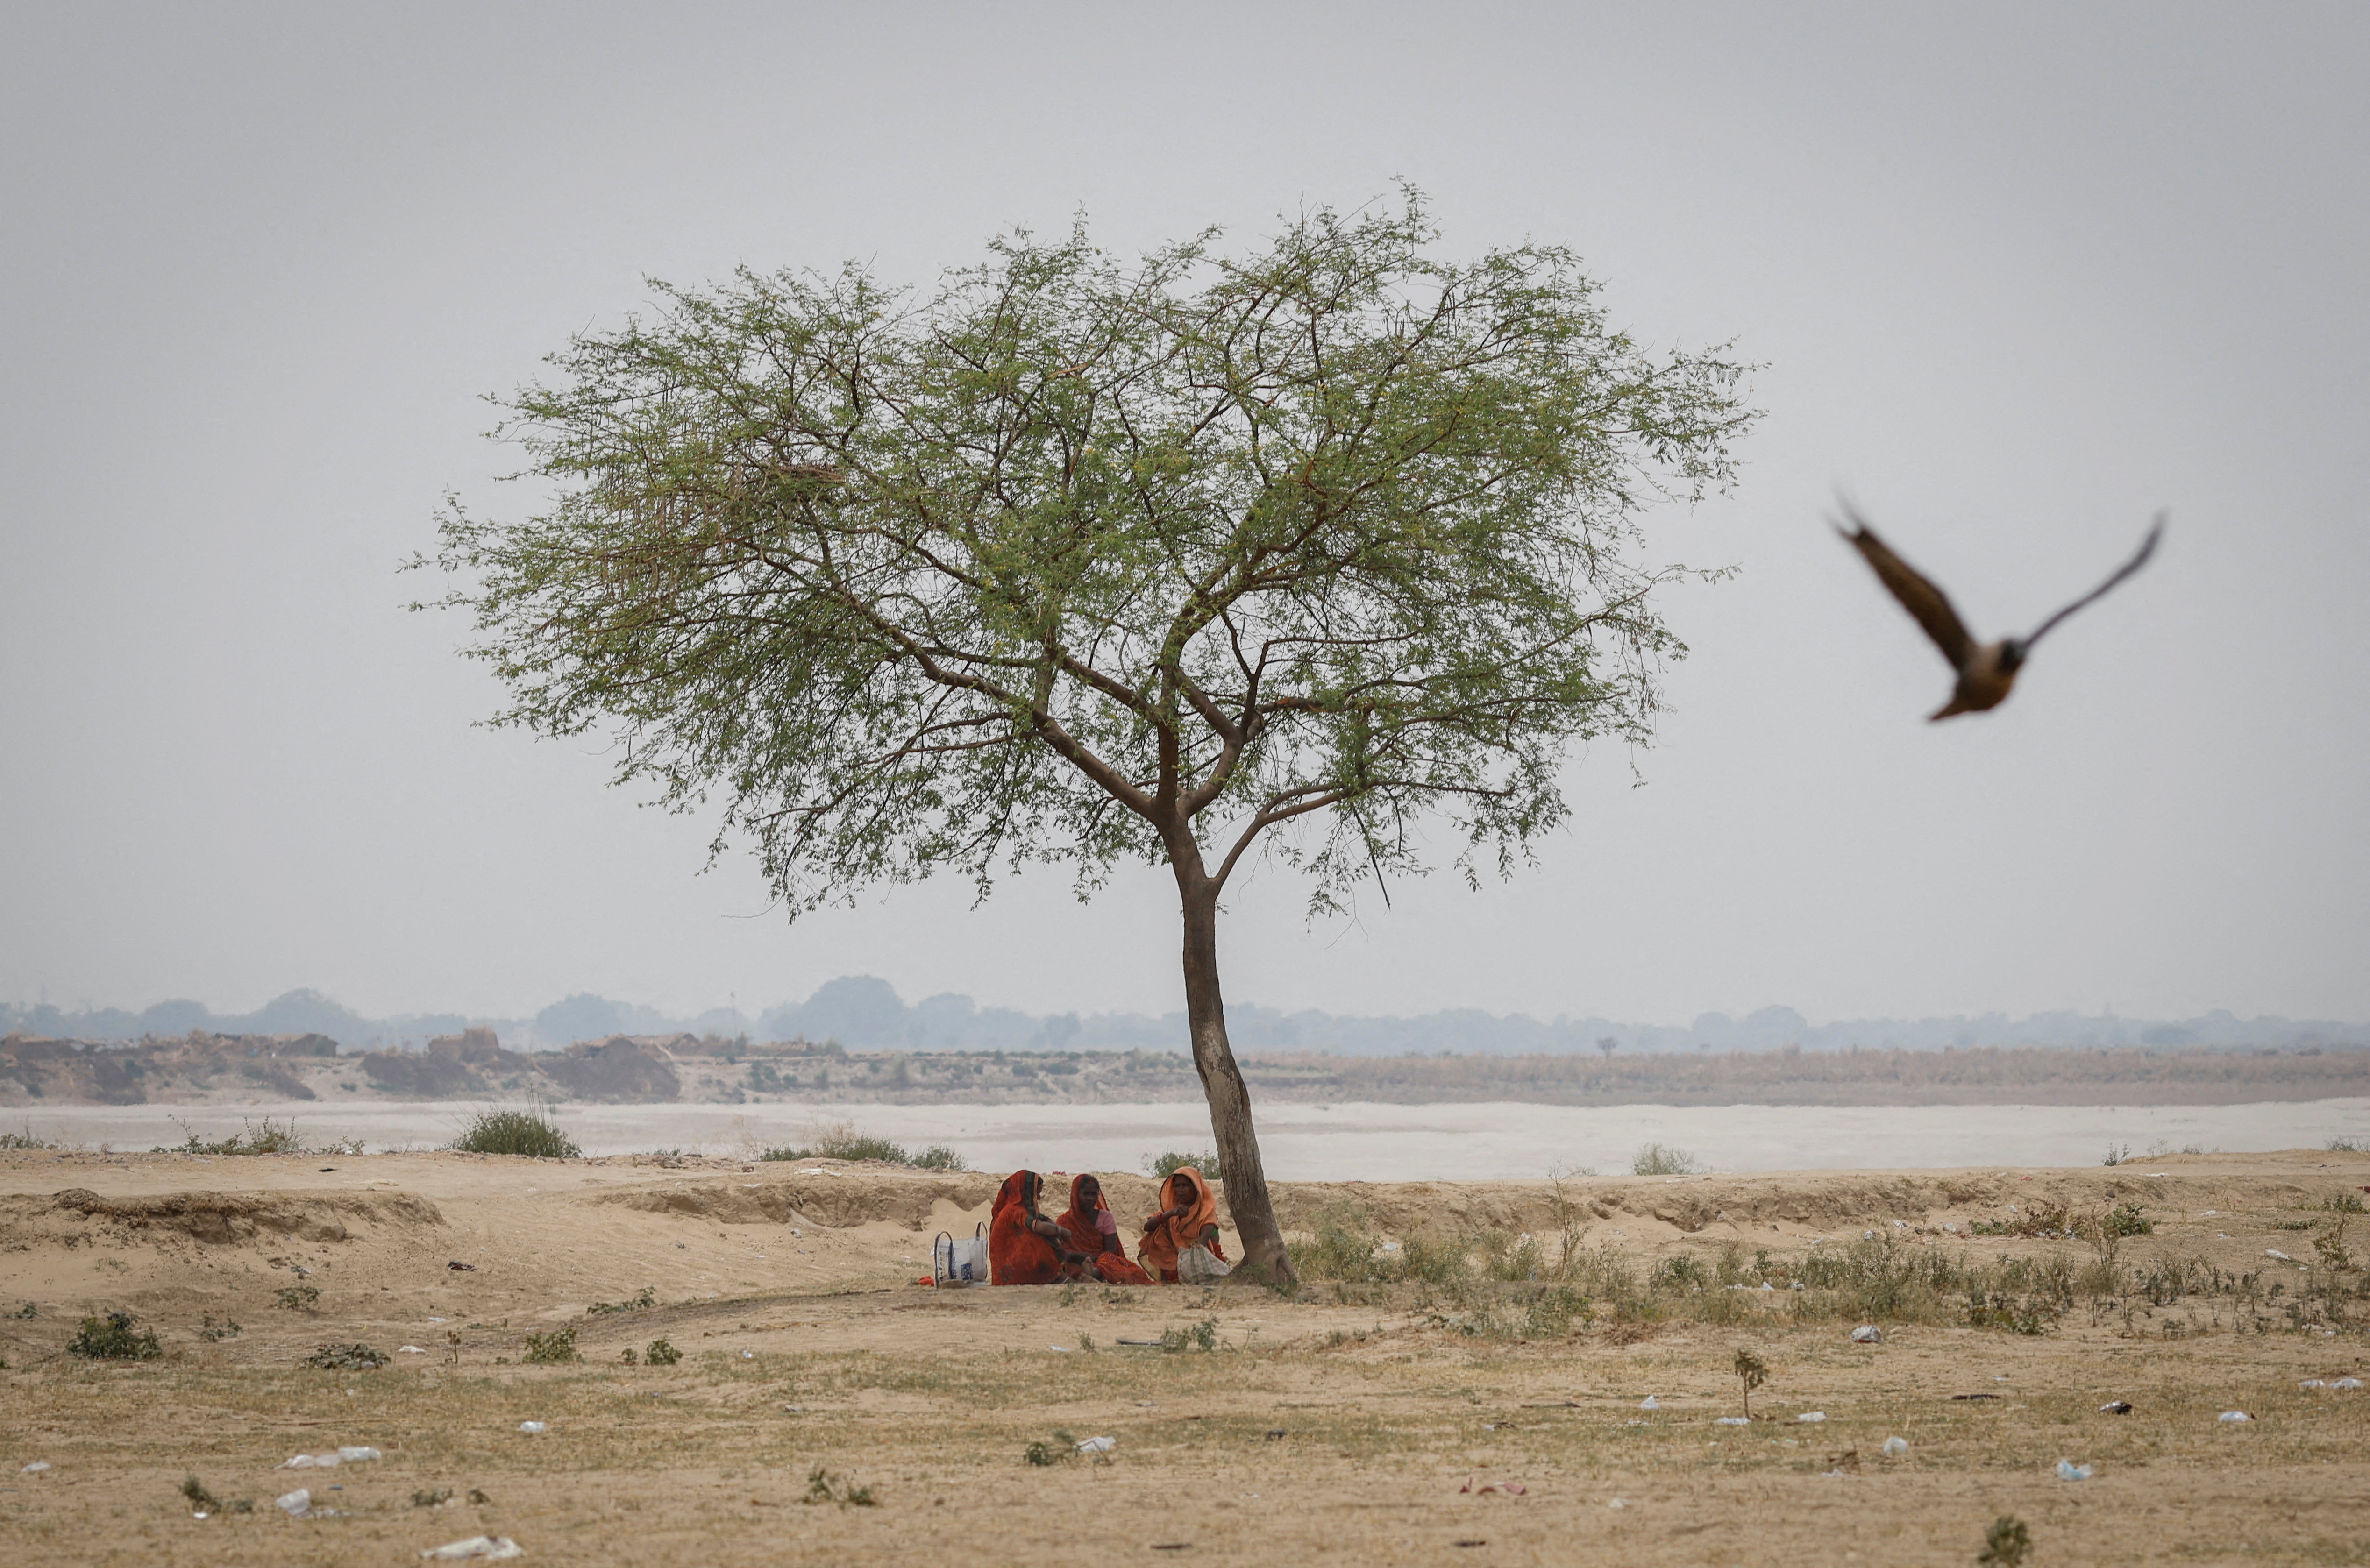 2.2 billion people in India and the Indus Valley could be exposed to heat-related health risks due to climate change